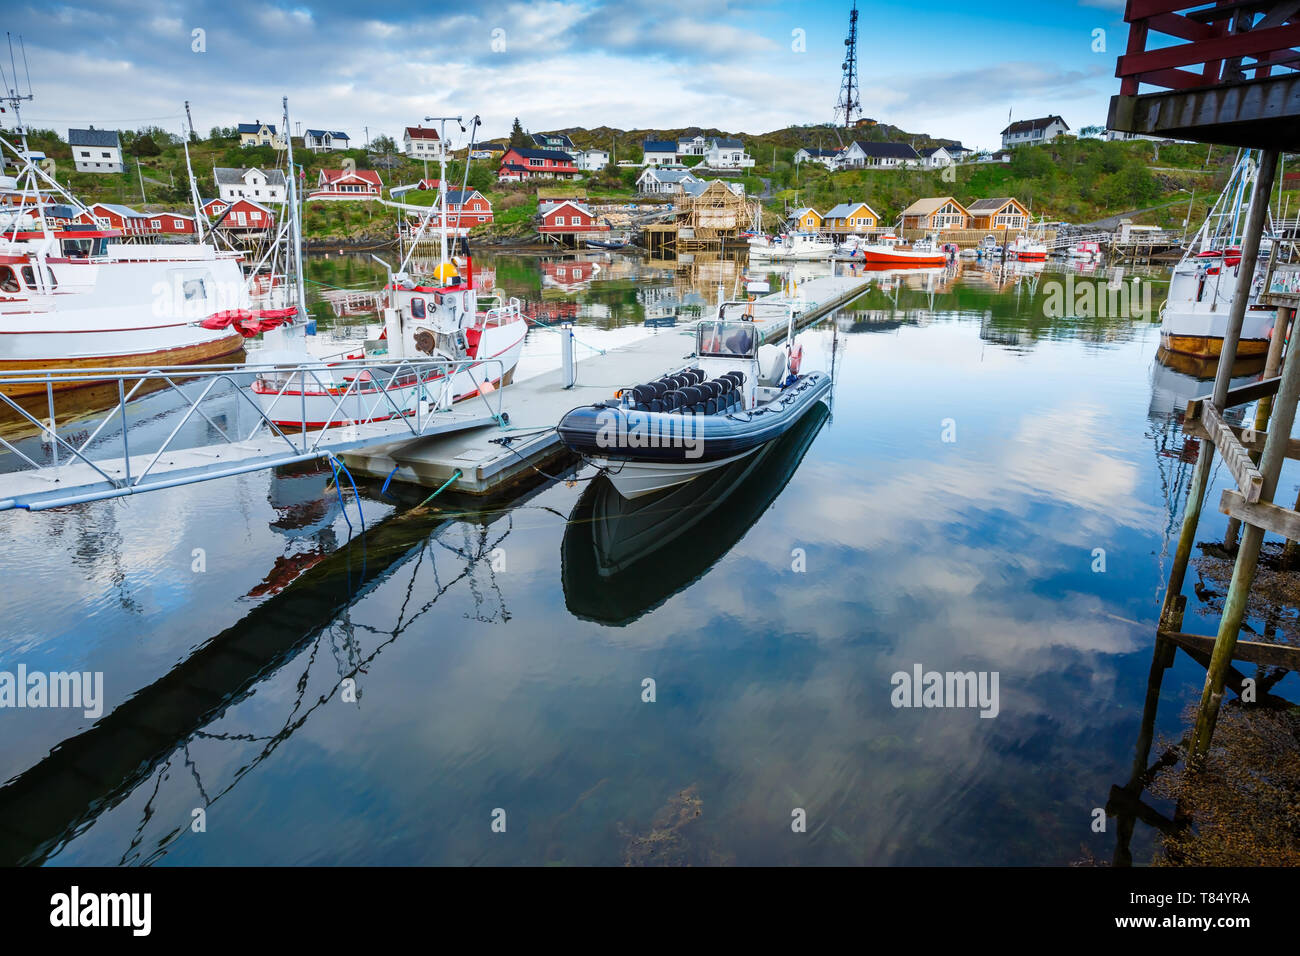 The view of the fisherman village Sorvagen with typical rorbu houses and boats in Lofoten islands, Norway. Stock Photo